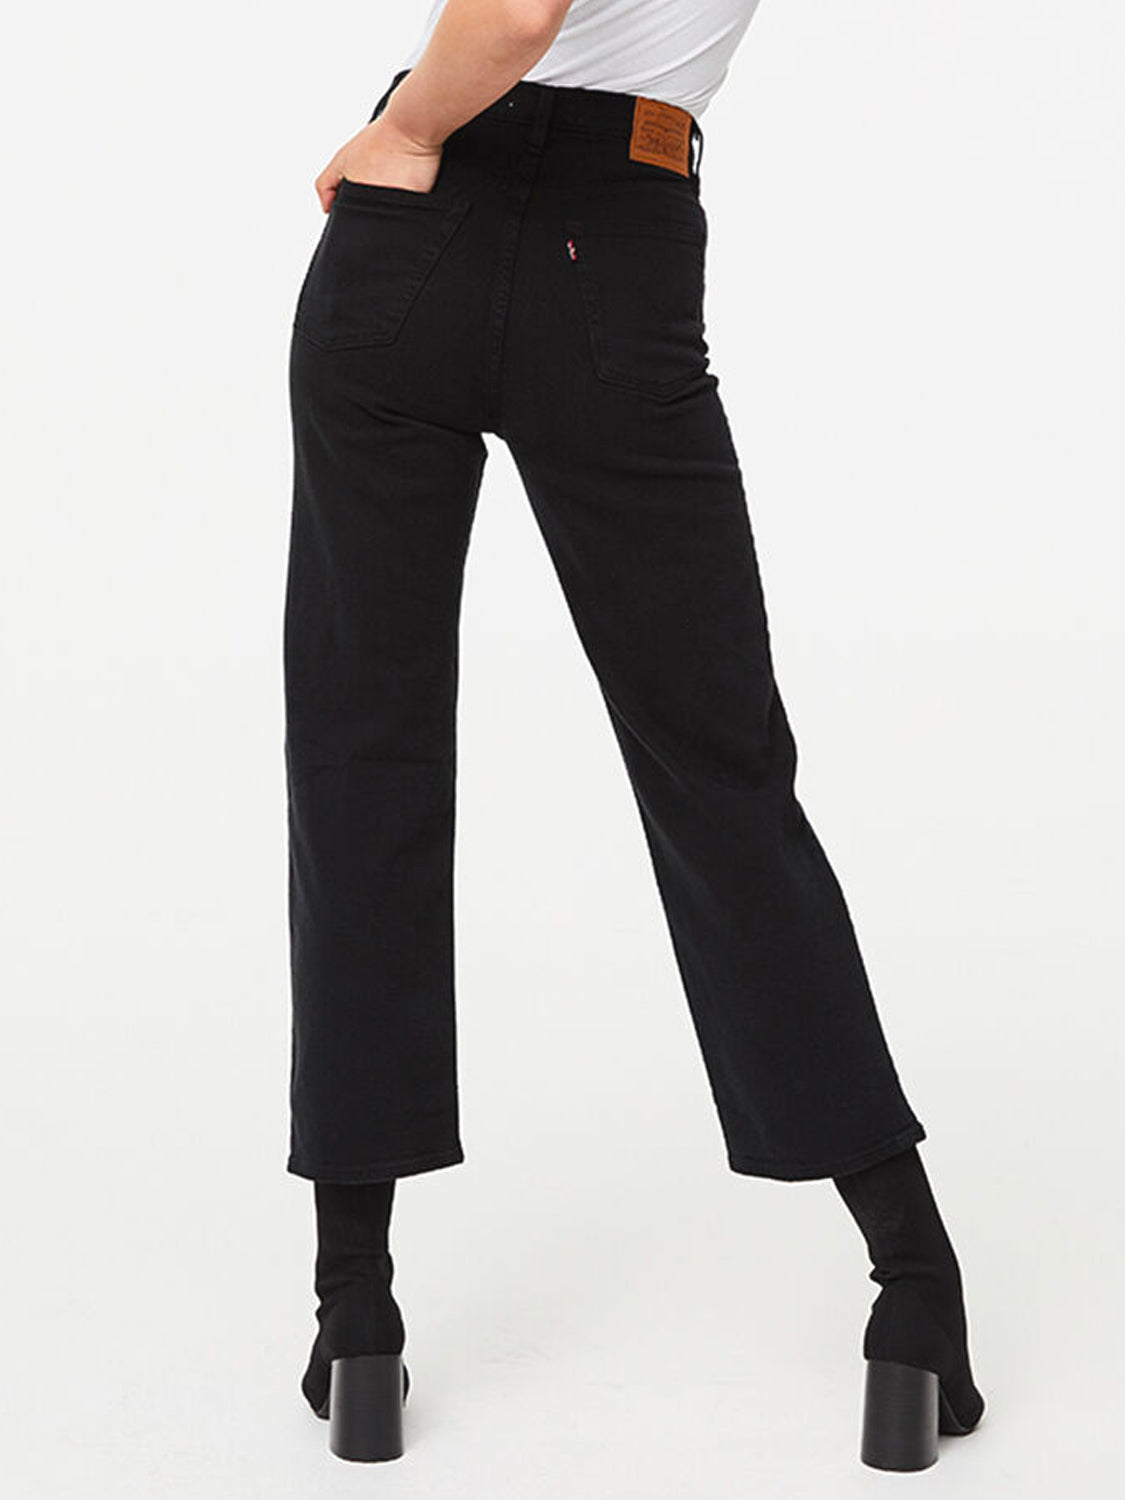 Levi's - Ribcage Straight Ankle Jean - Black Sprout